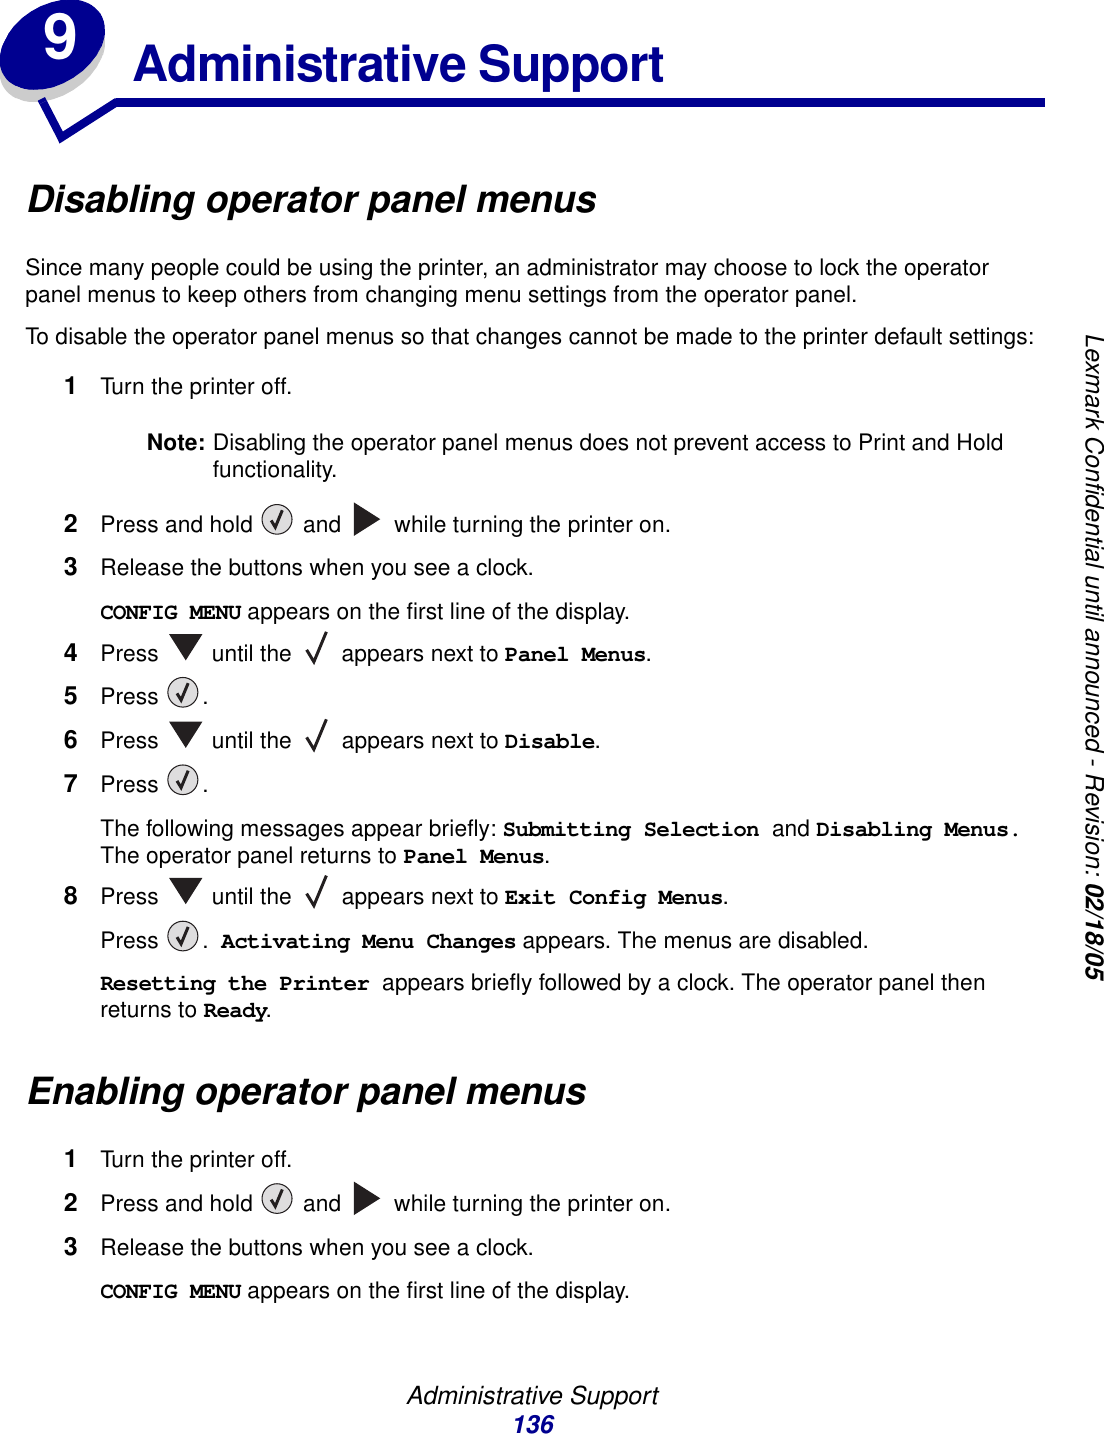 Administrative Support136Lexmark Confidential until announced - Revision: 02/18/059Administrative SupportDisabling operator panel menusSince many people could be using the printer, an administrator may choose to lock the operator panel menus to keep others from changing menu settings from the operator panel.To disable the operator panel menus so that changes cannot be made to the printer default settings:1Turn the printer off.Note: Disabling the operator panel menus does not prevent access to Print and Hold functionality.2Press and hold   and   while turning the printer on.3Release the buttons when you see a clock.CONFIG MENU appears on the first line of the display.4Press   until the   appears next to Panel Menus.5Press .6Press   until the   appears next to Disable.7Press .The following messages appear briefly: Submitting Selection and Disabling Menus. The operator panel returns to Panel Menus.8Press   until the   appears next to Exit Config Menus.Press . Activating Menu Changes appears. The menus are disabled. Resetting the Printer appears briefly followed by a clock. The operator panel then returns to Ready.Enabling operator panel menus1Turn the printer off.2Press and hold   and   while turning the printer on.3Release the buttons when you see a clock.CONFIG MENU appears on the first line of the display.